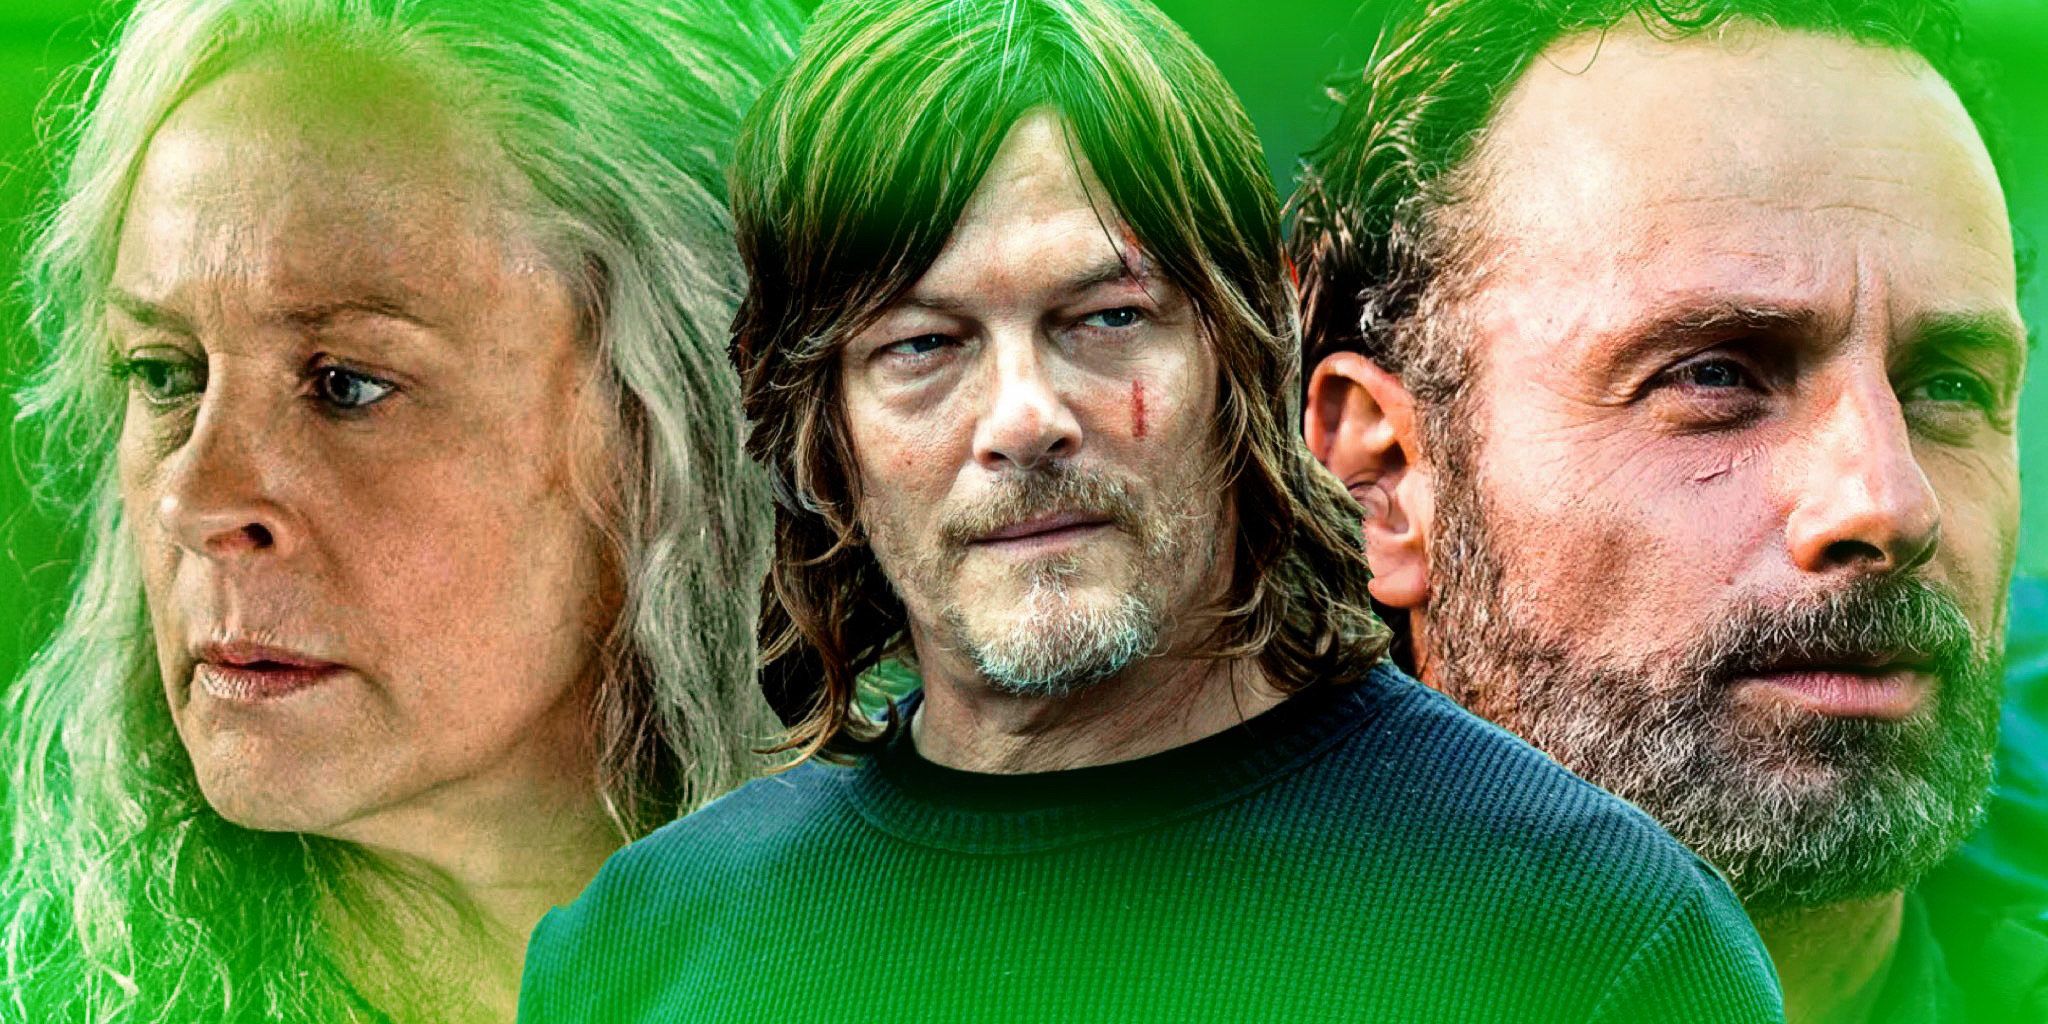 Carol, Daryl, and Rick in The Walking Dead